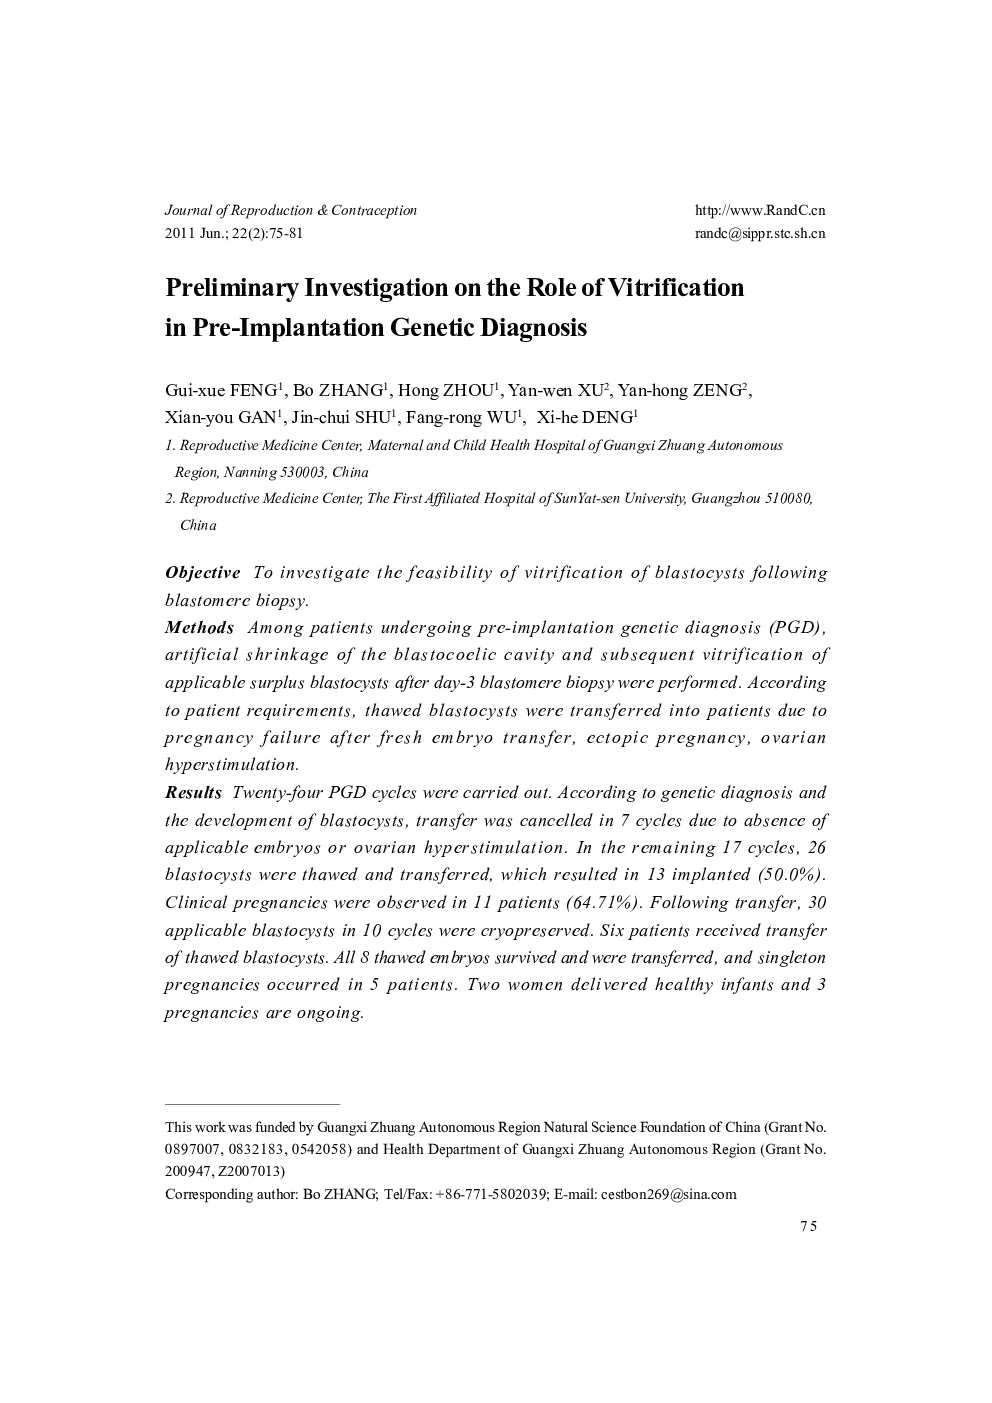 Preliminary Investigation on the Role of Vitrification in Pre-Implantation Genetic Diagnosis 